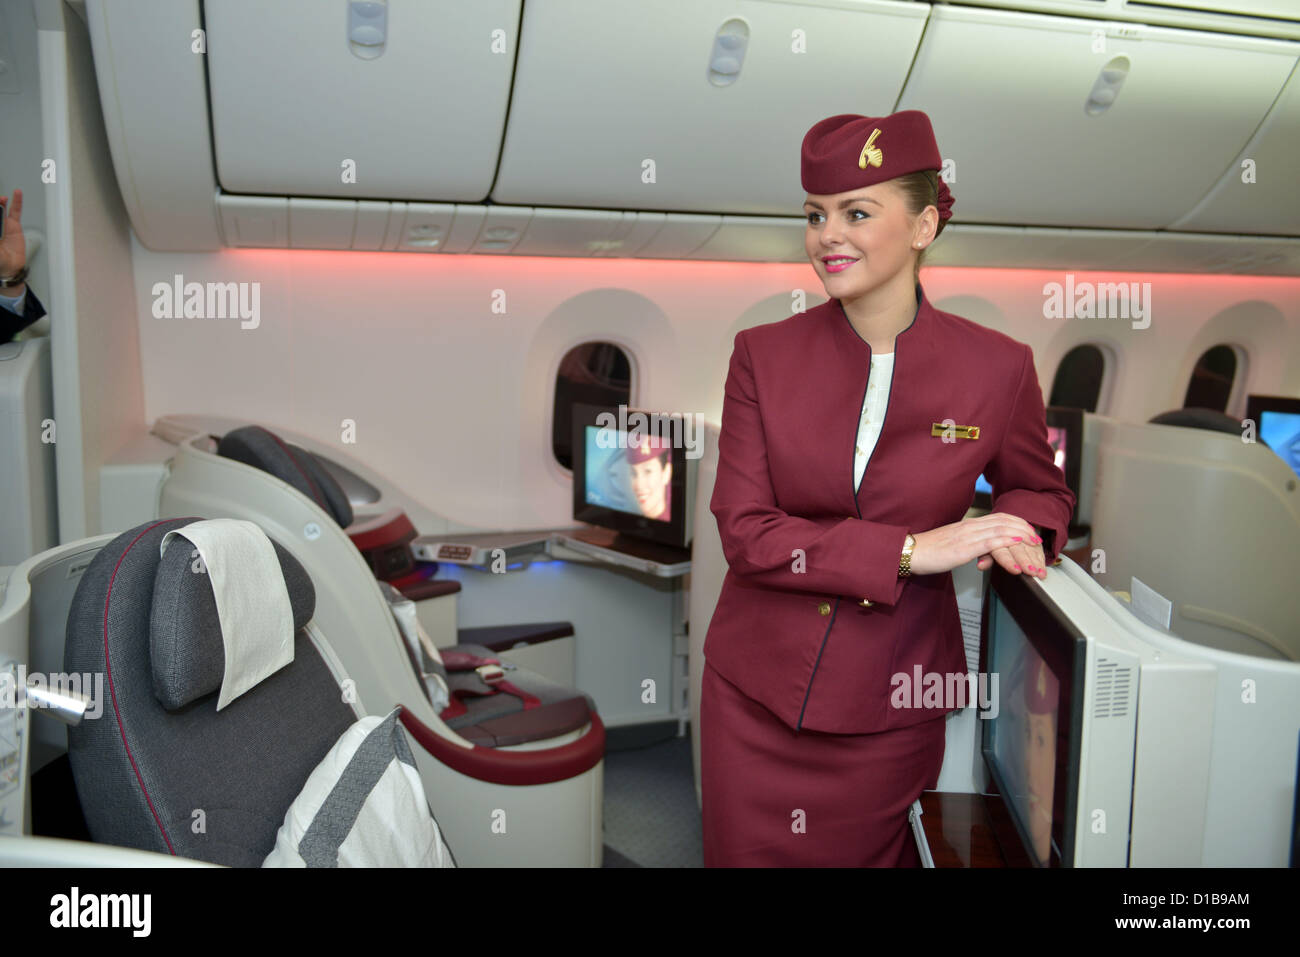 Qatar Dreamliner aircraft interior with stewardess, Business and First Class section Stock Photo